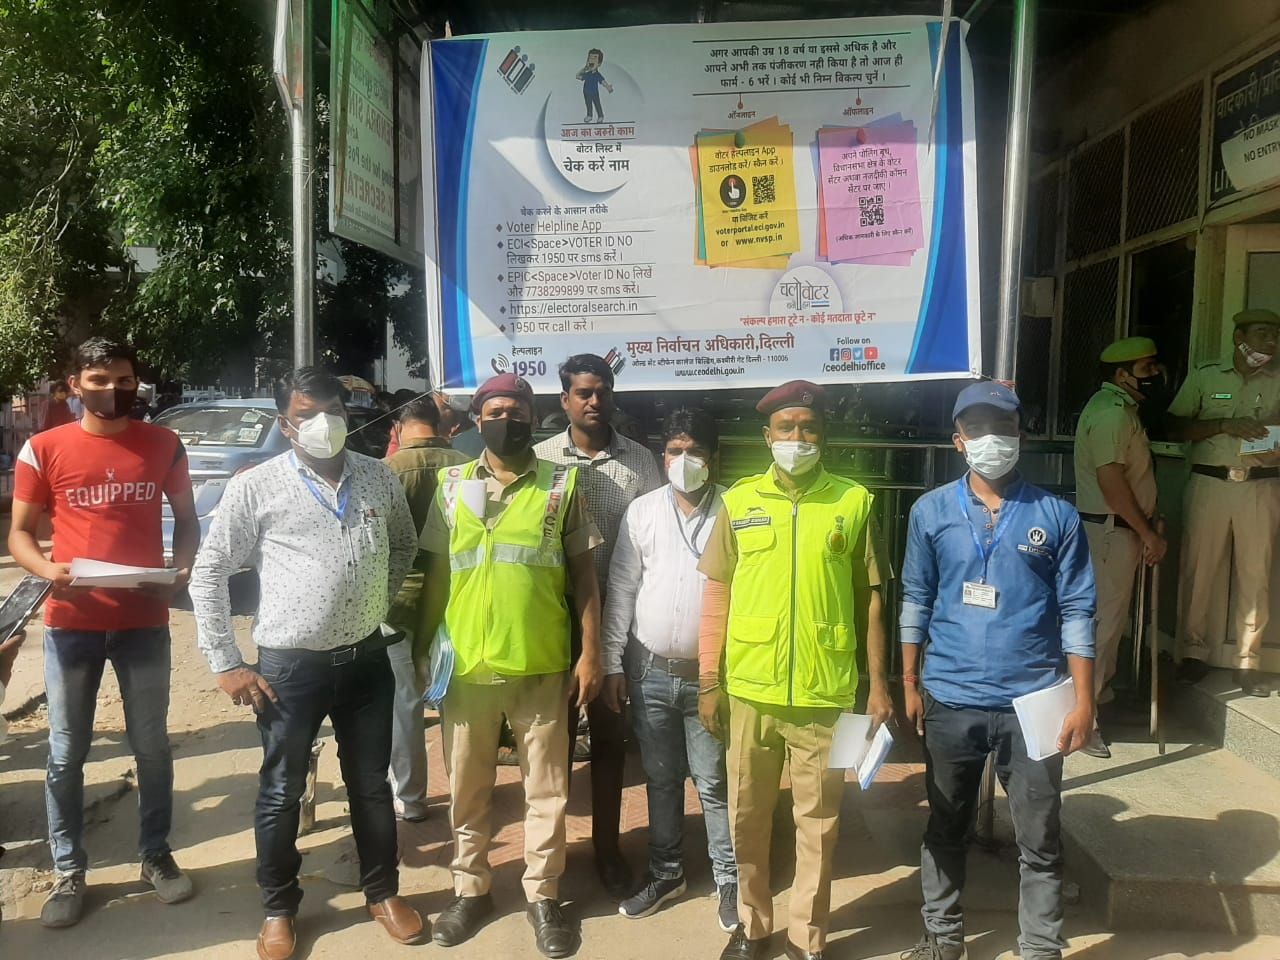 Voter Awareness help desk at Special Delhi Traffic Police Lok Adalat at various Court Complexes on 10.10.2021.